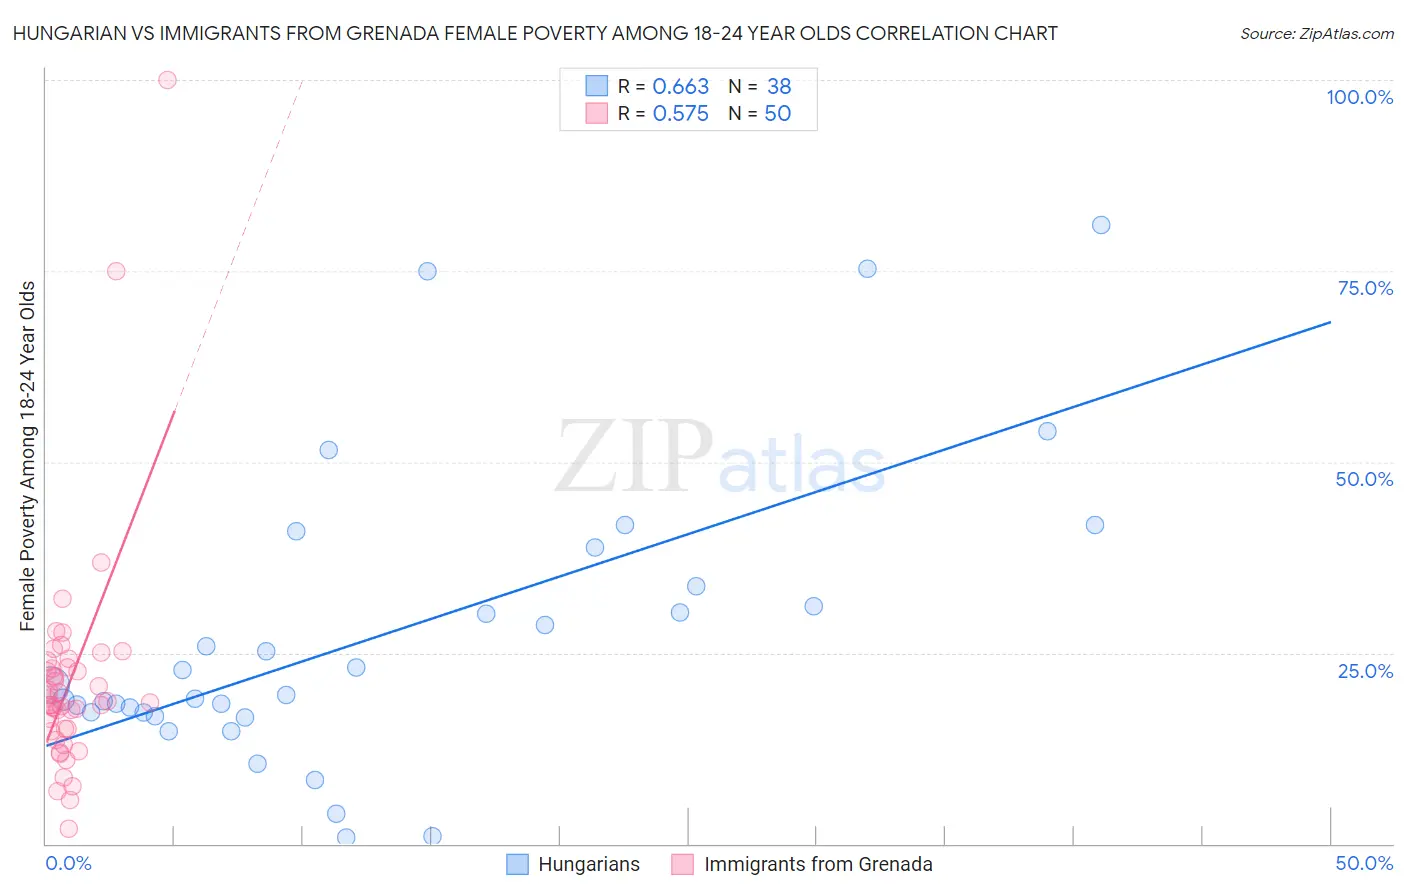 Hungarian vs Immigrants from Grenada Female Poverty Among 18-24 Year Olds